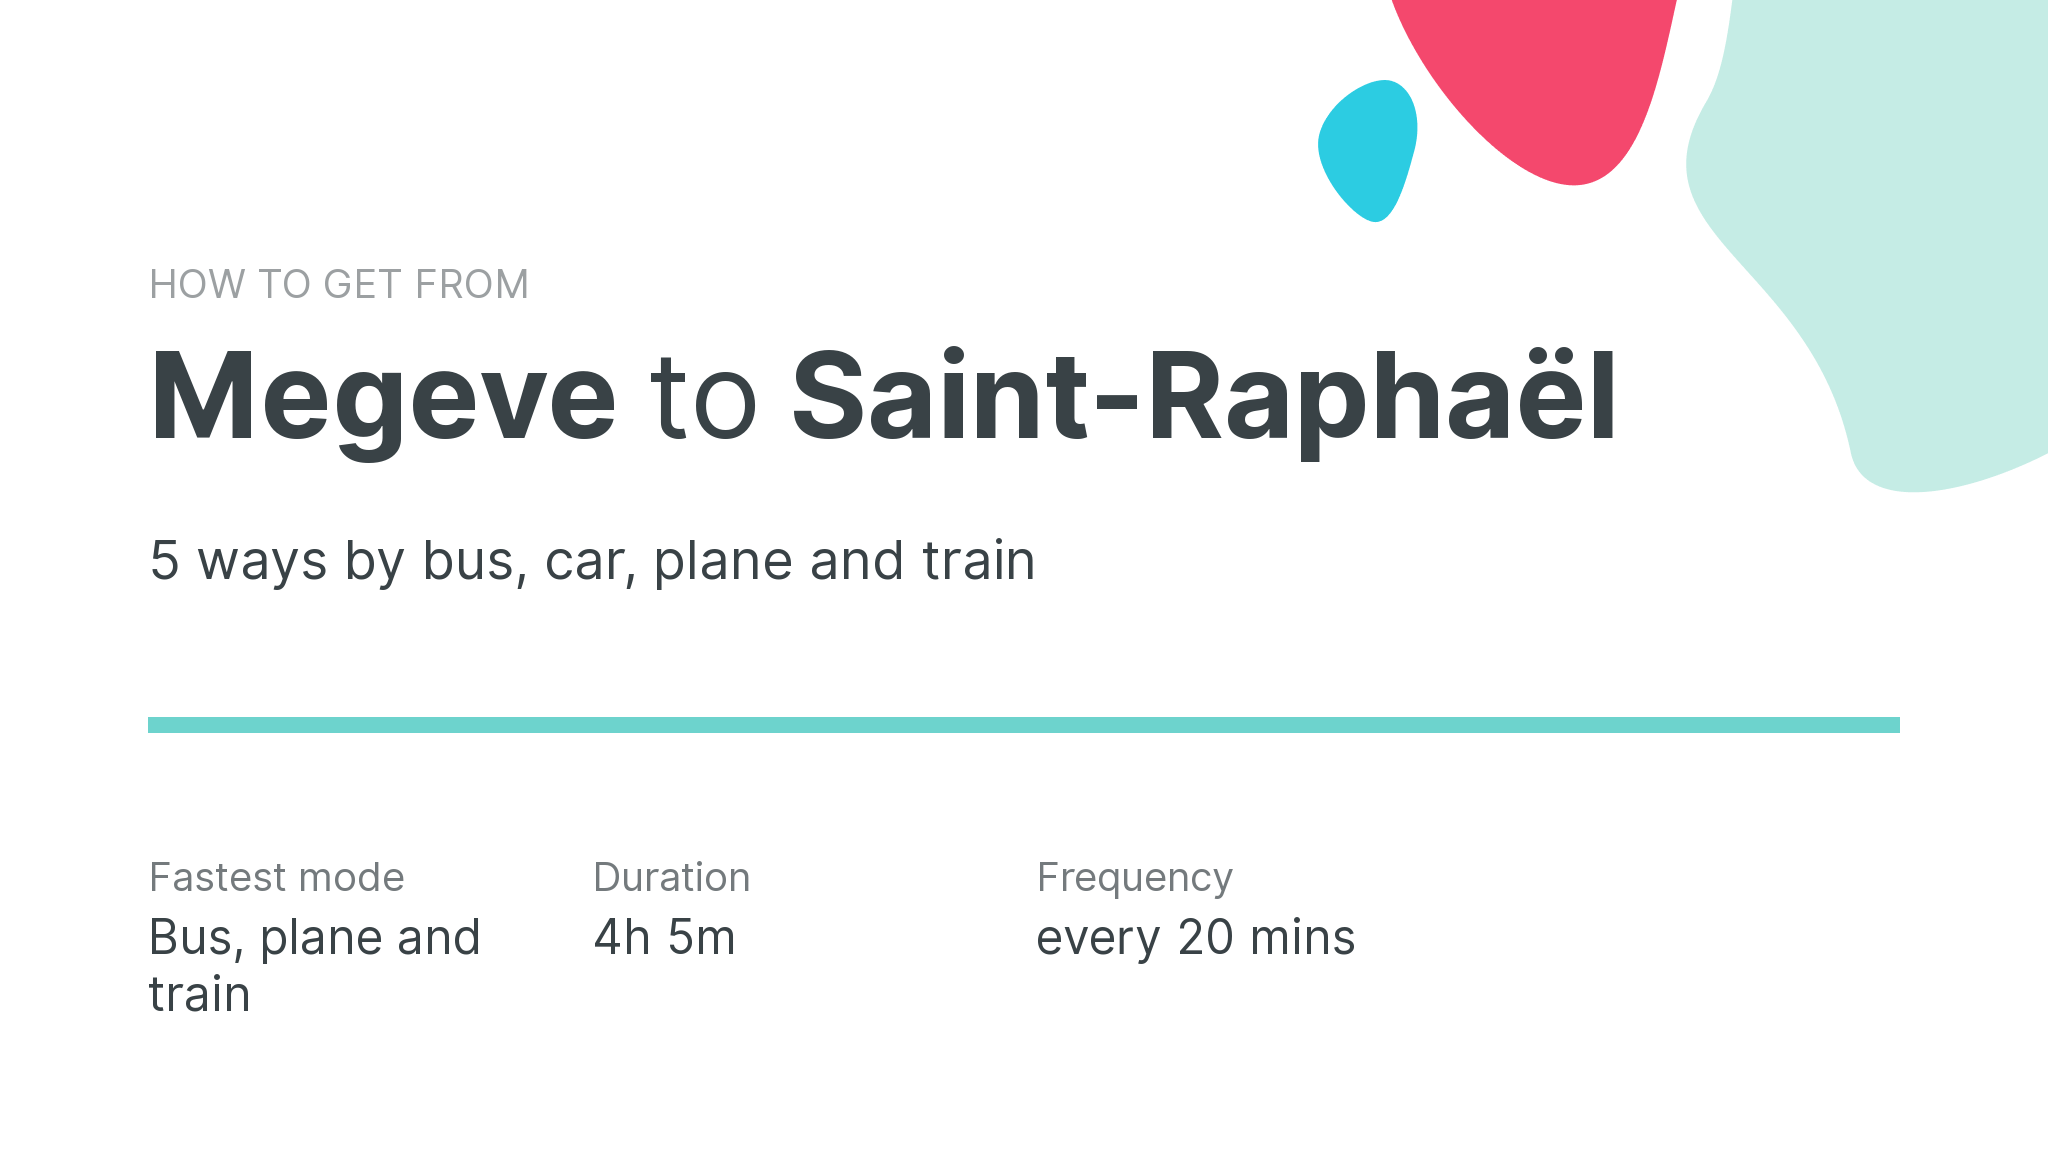 How do I get from Megeve to Saint-Raphaël